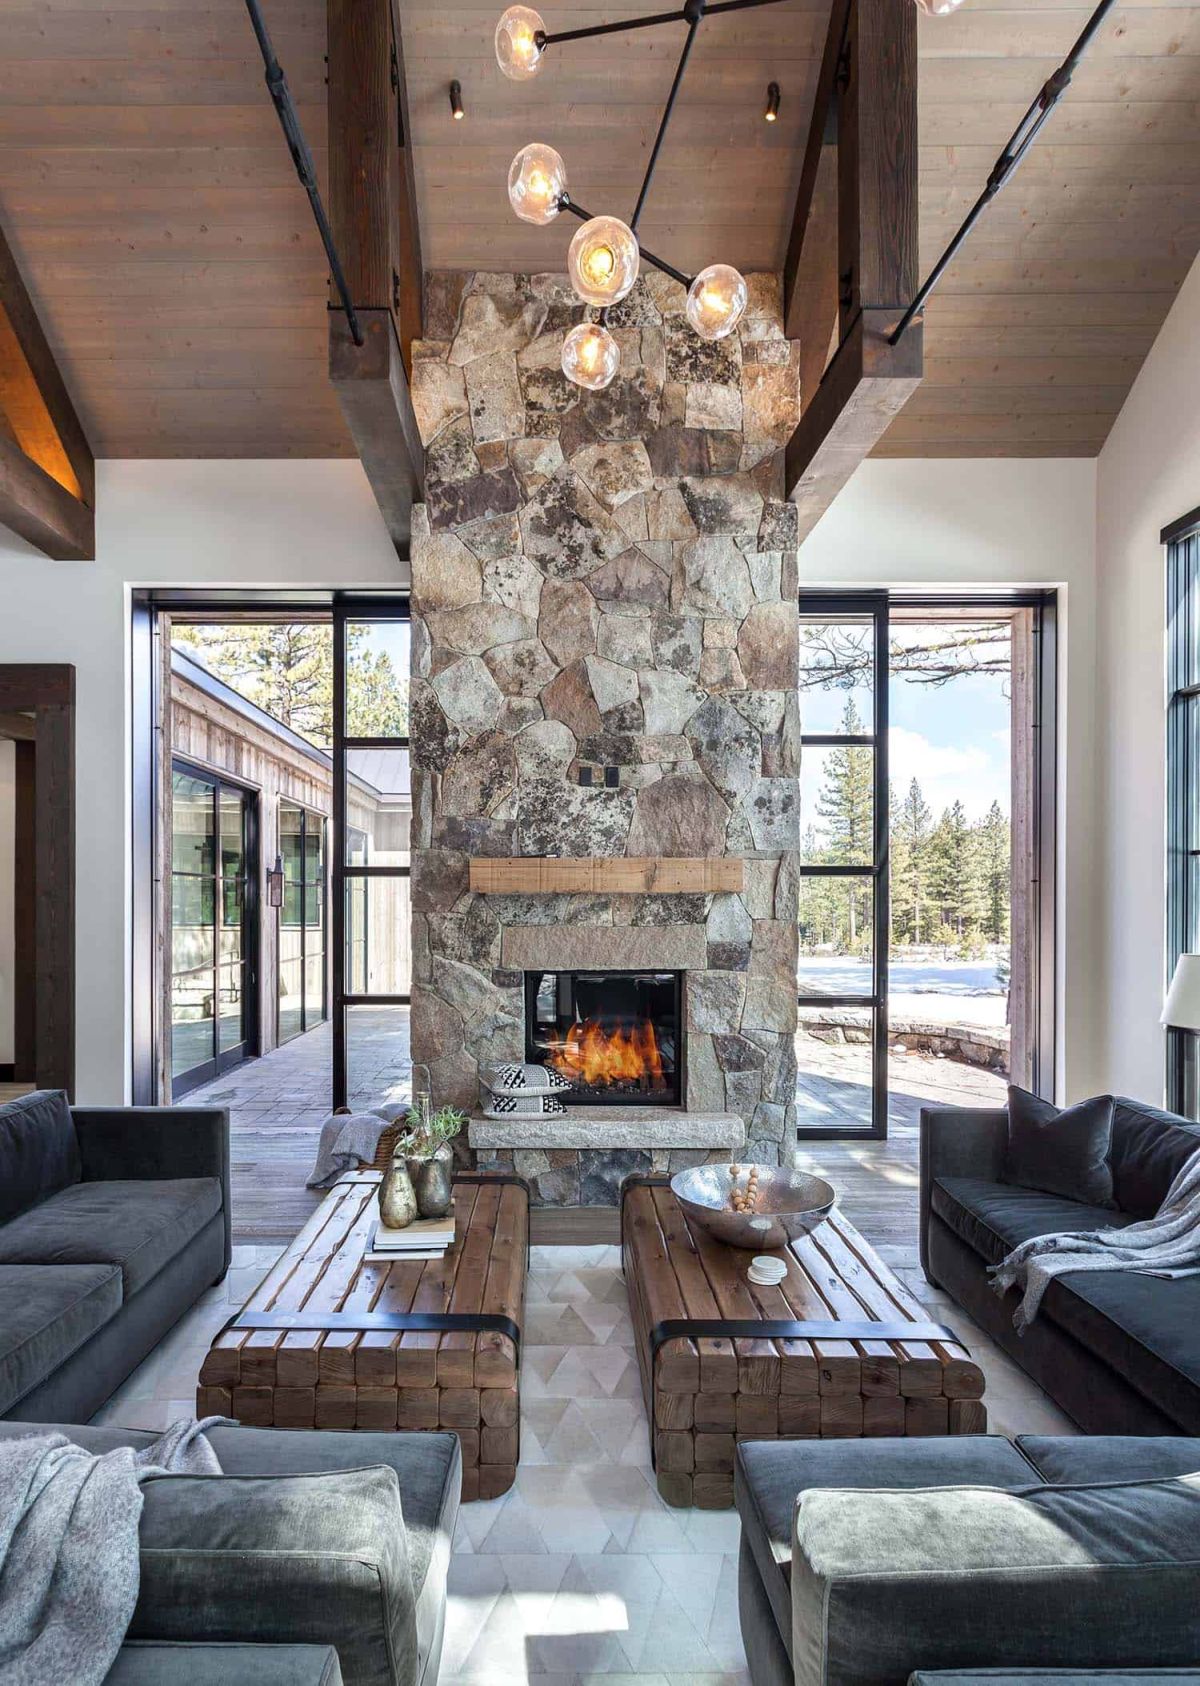 The floor-to-ceiling stone fireplace in the living room has sliding doors on either side which disappear inside it when open